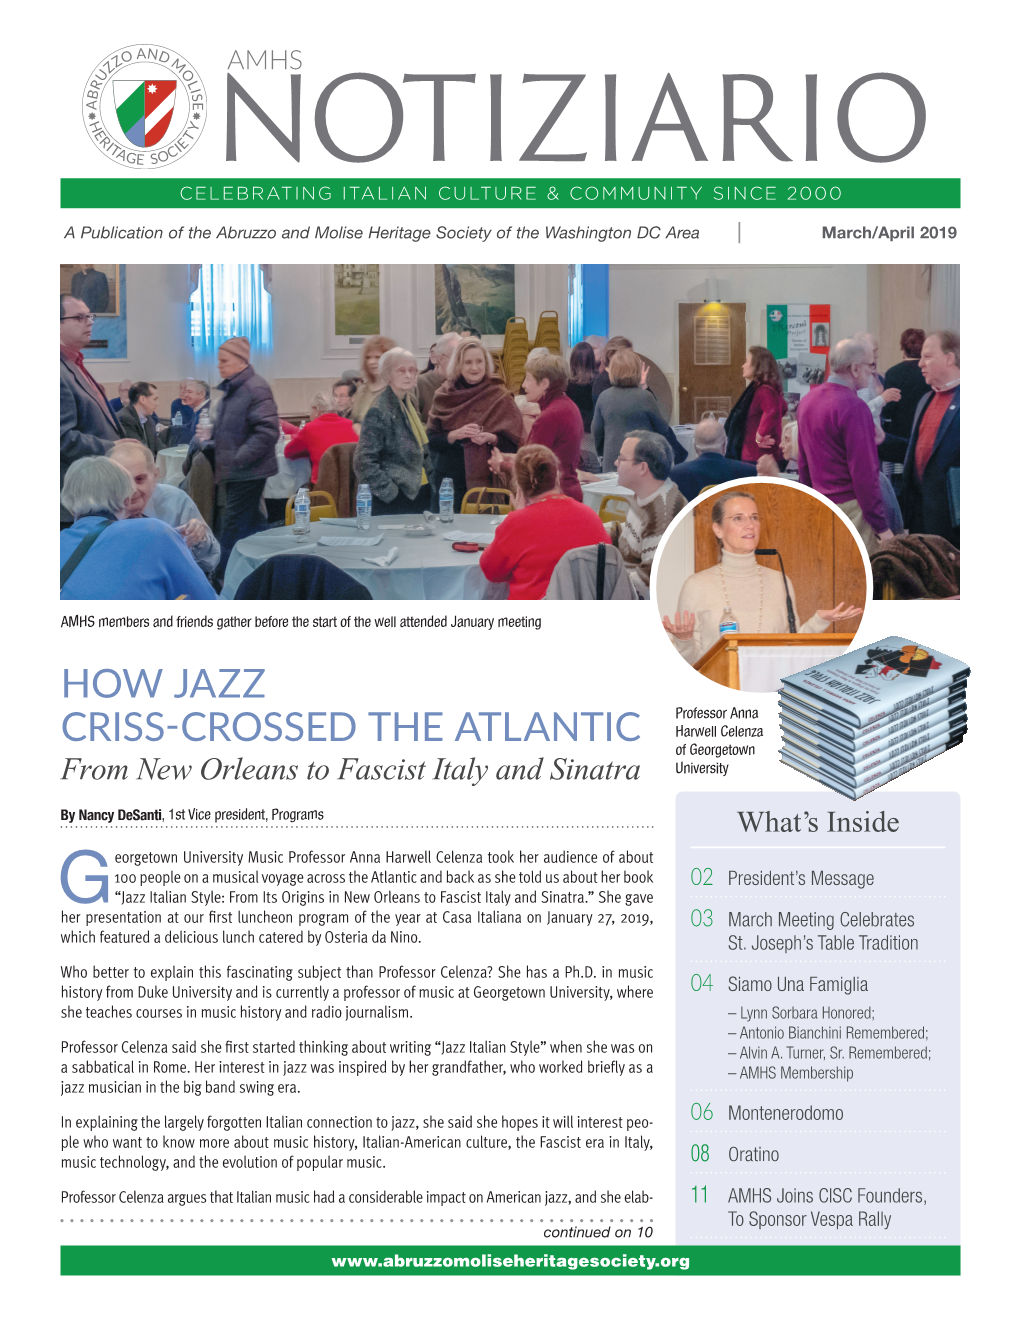 HOW JAZZ CRISS-CROSSED the ATLANTIC: from New Orleans to Fascist Italy and Sinatra ▼ Continued from Page 1 Orated on How Jazz Landed in Italy with the U.S